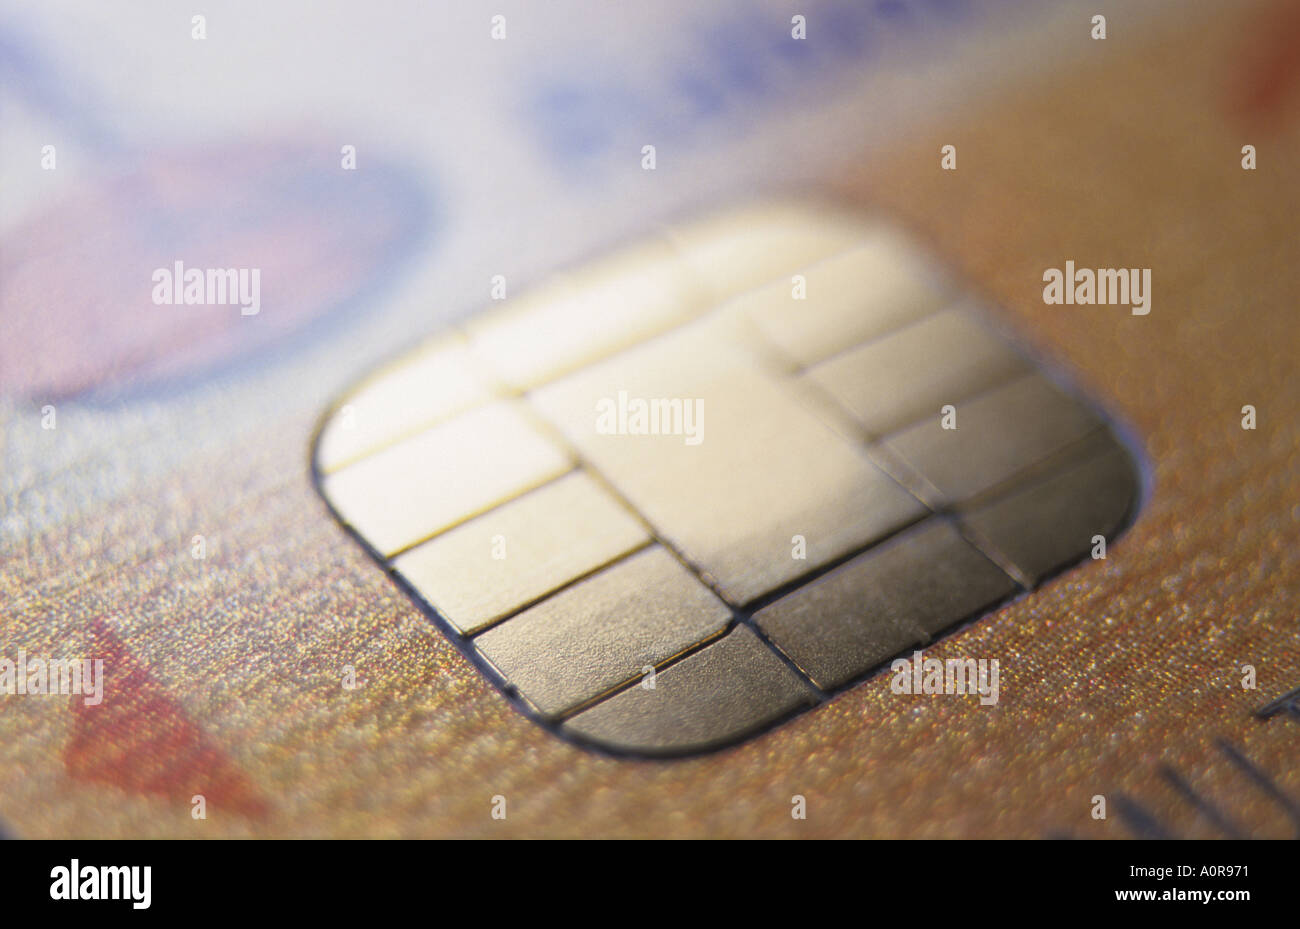 Chip on a Credit Card Stock Photo